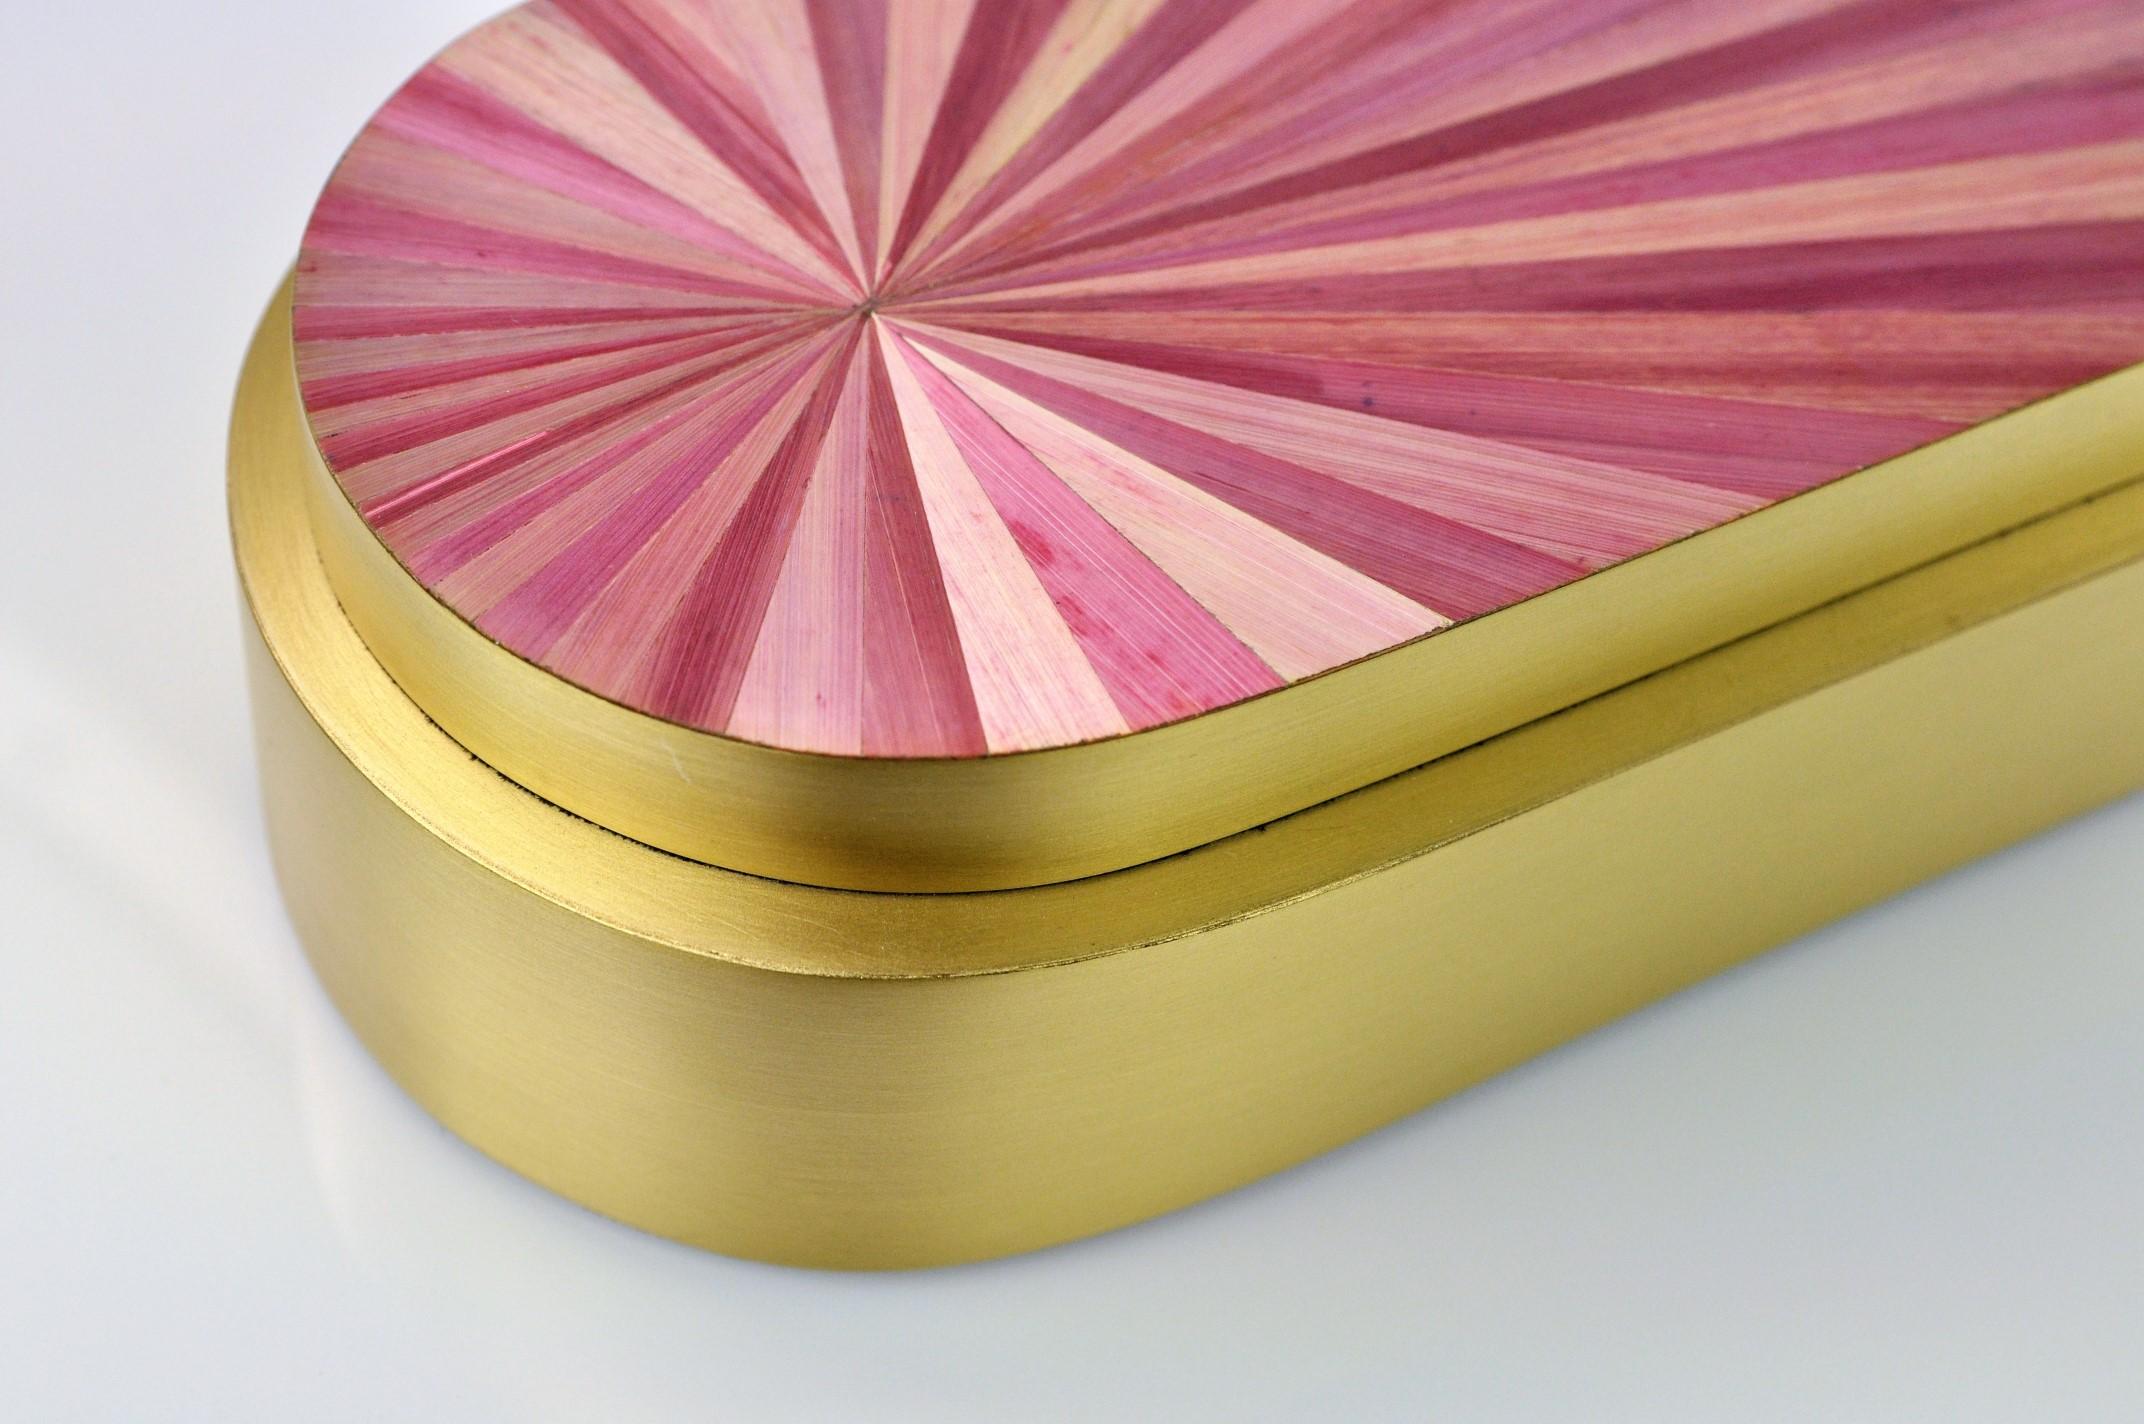 This lovely brass box is made of brushed brass with a lid covered of straw marquetry. 
The radial design of the straw reminds the great Art deco period while the elegant pink color contrasts perfectly with the gold brass.
The base has a black